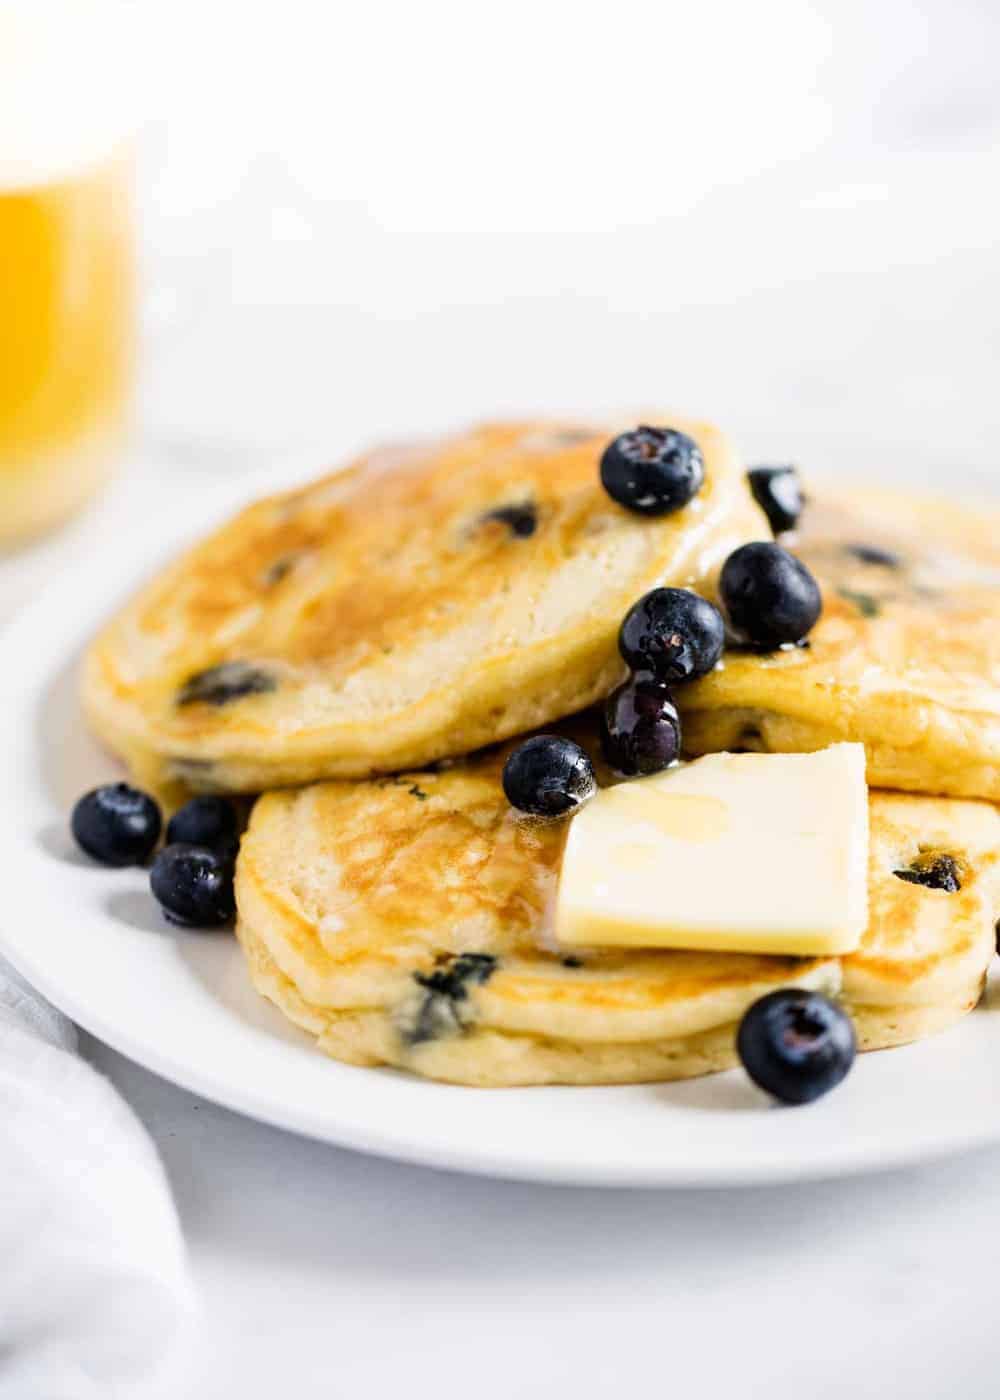 Blueberry pancakes on plate with butter and syrup.